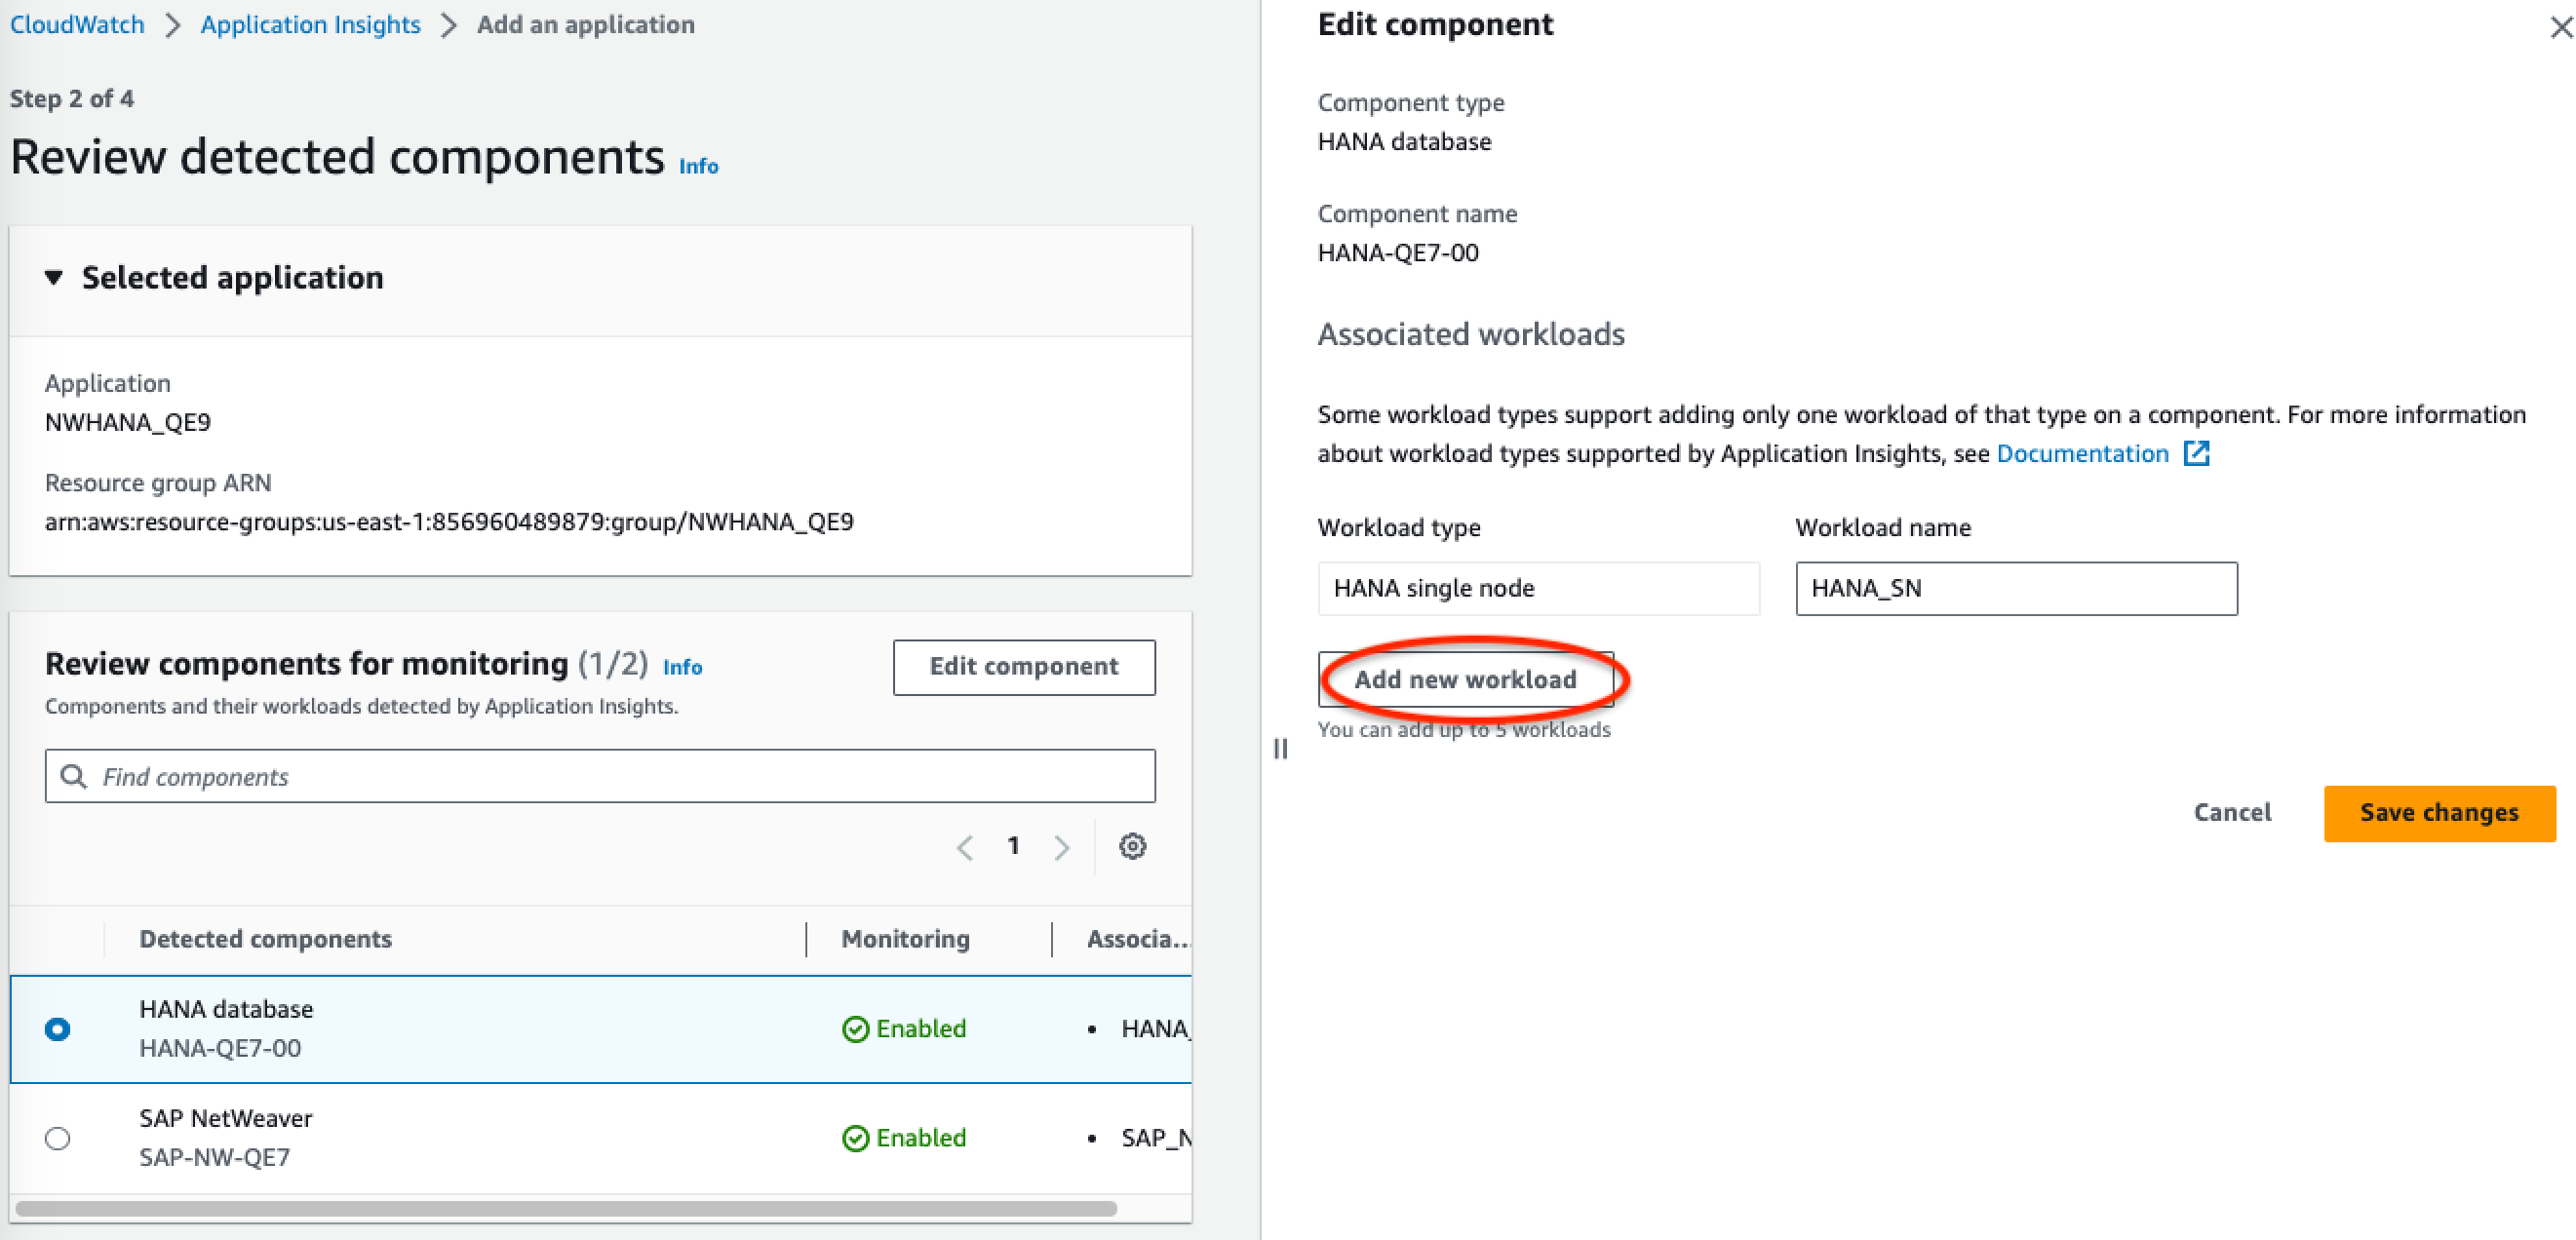 
                                    The edit component section of the CloudWatch Application Insights console: choose lower left button to add workload. 
                                